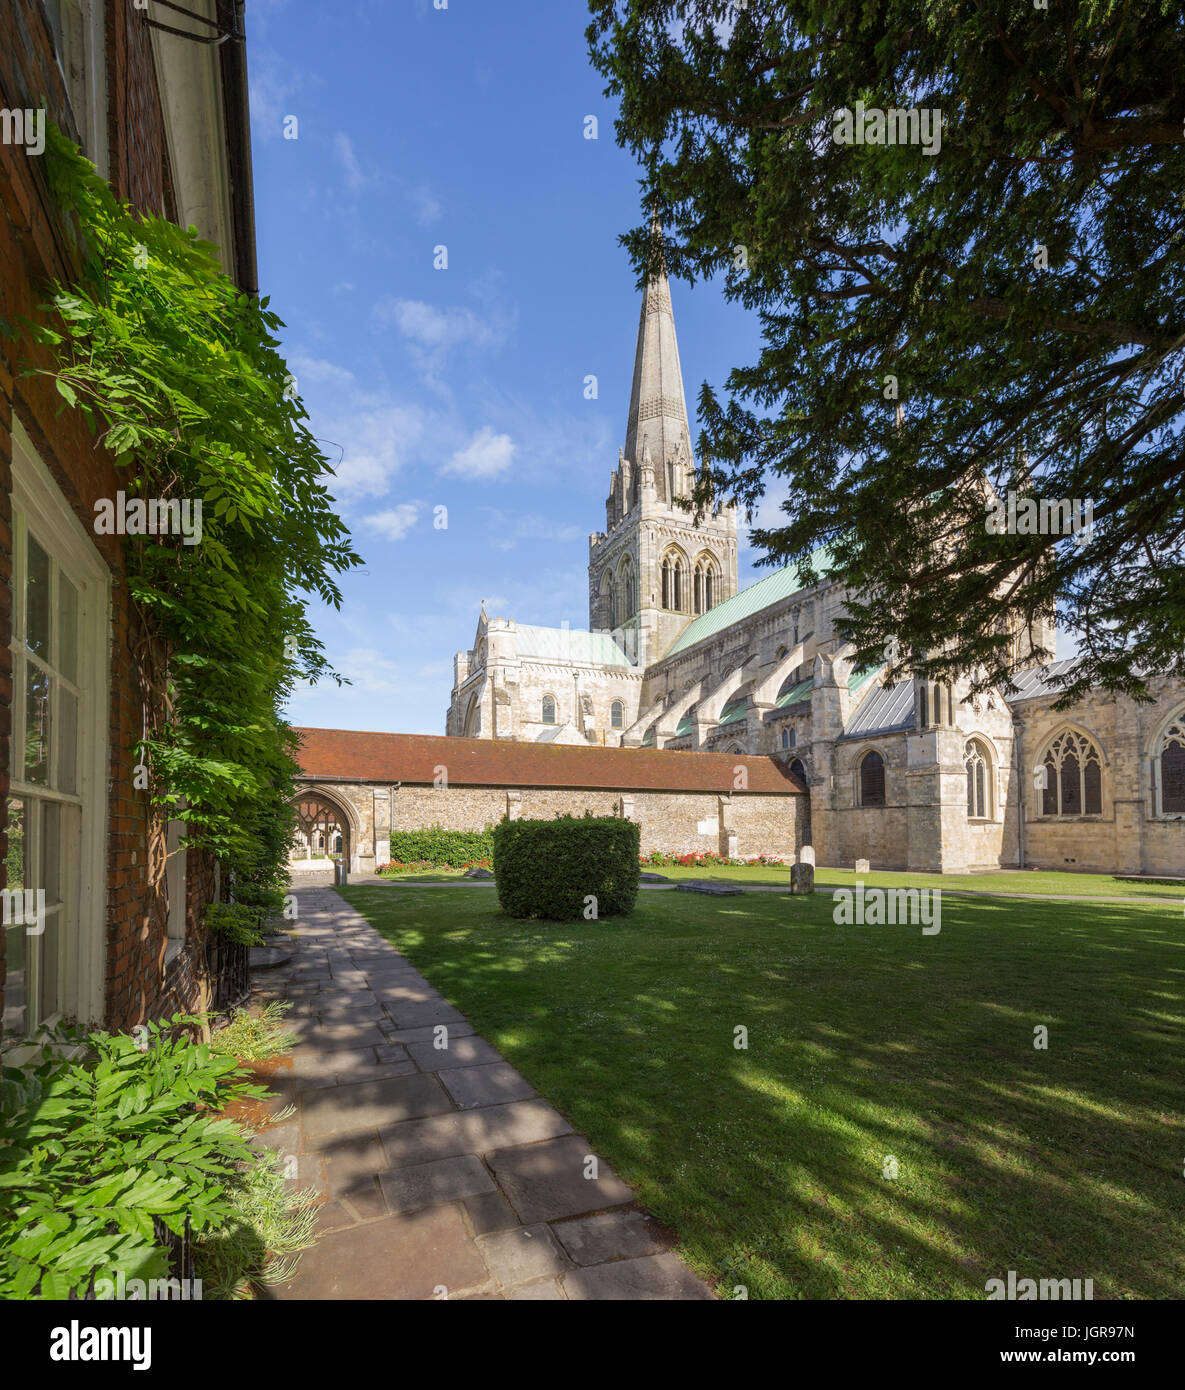 Chichester Cathedral, Chichester, West Sussex, England, UK Banque D'Images